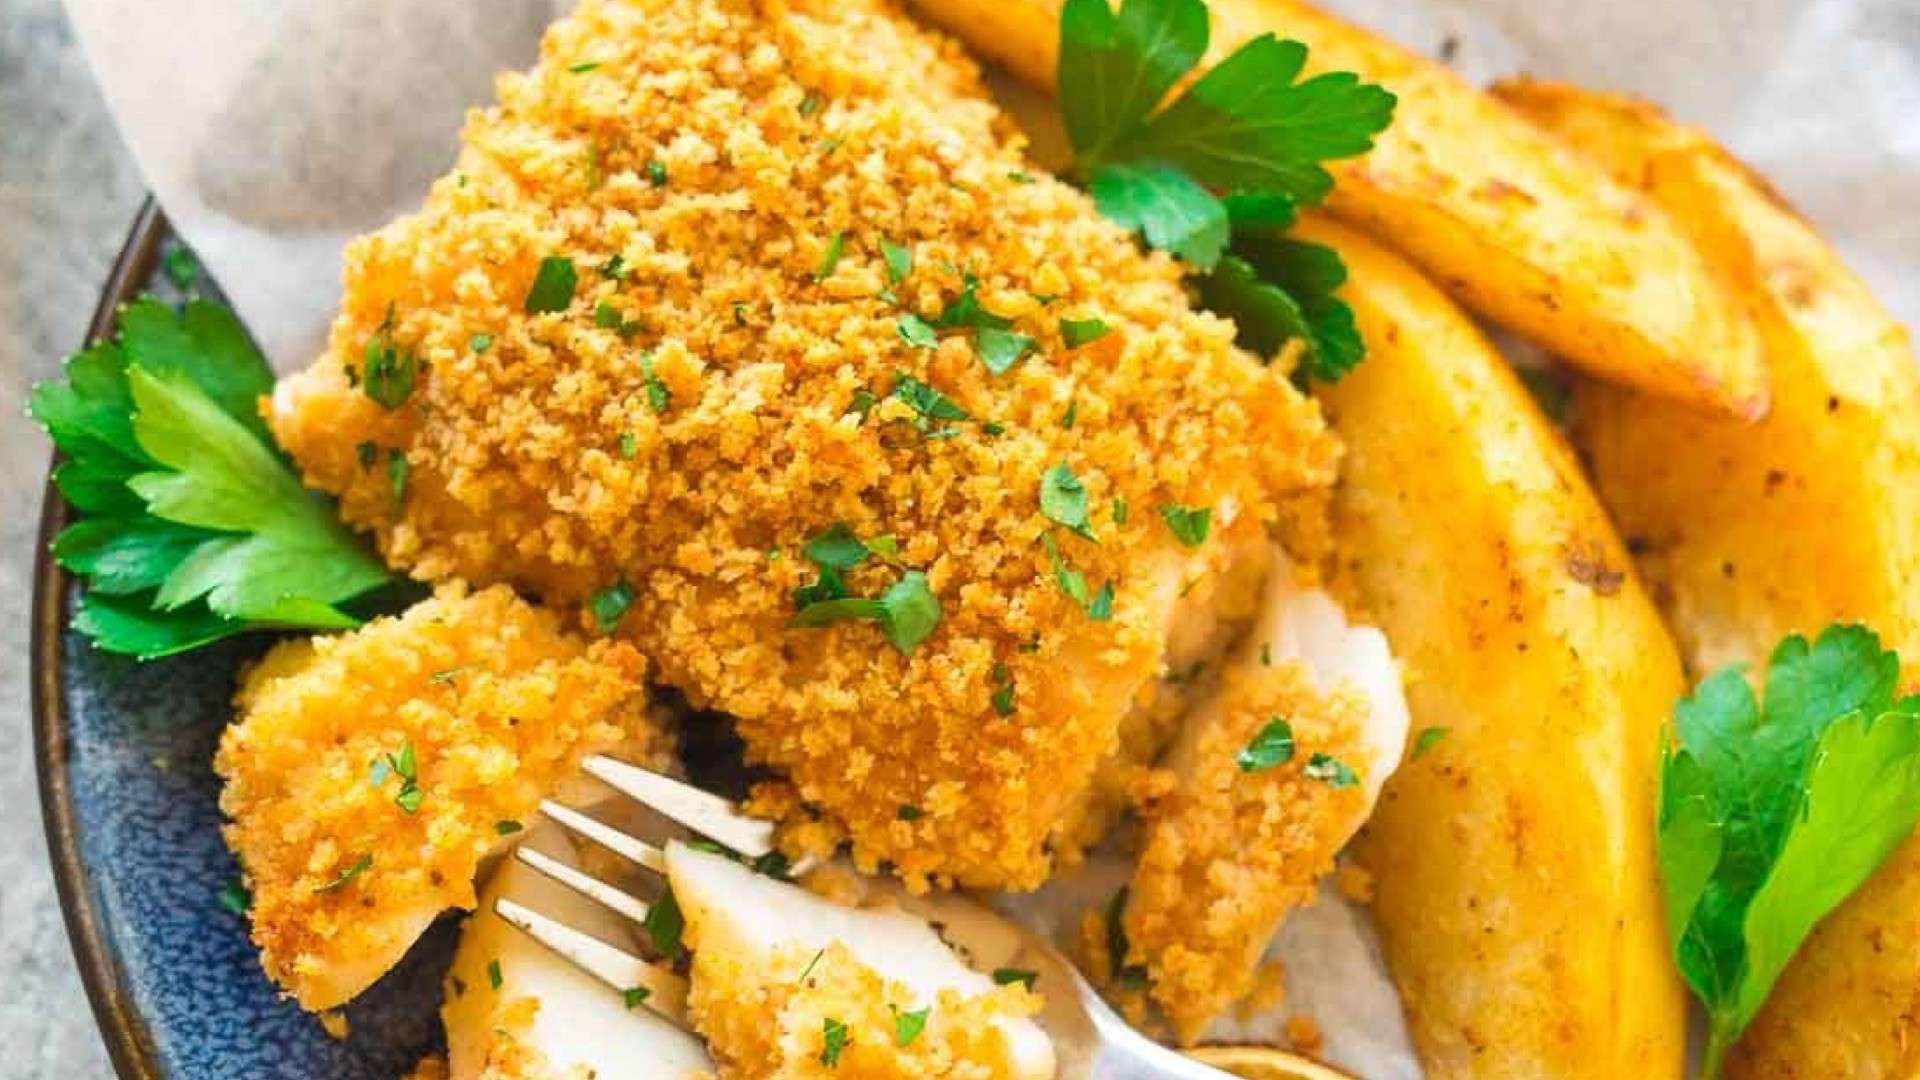 Oven-baked Fish & Chips